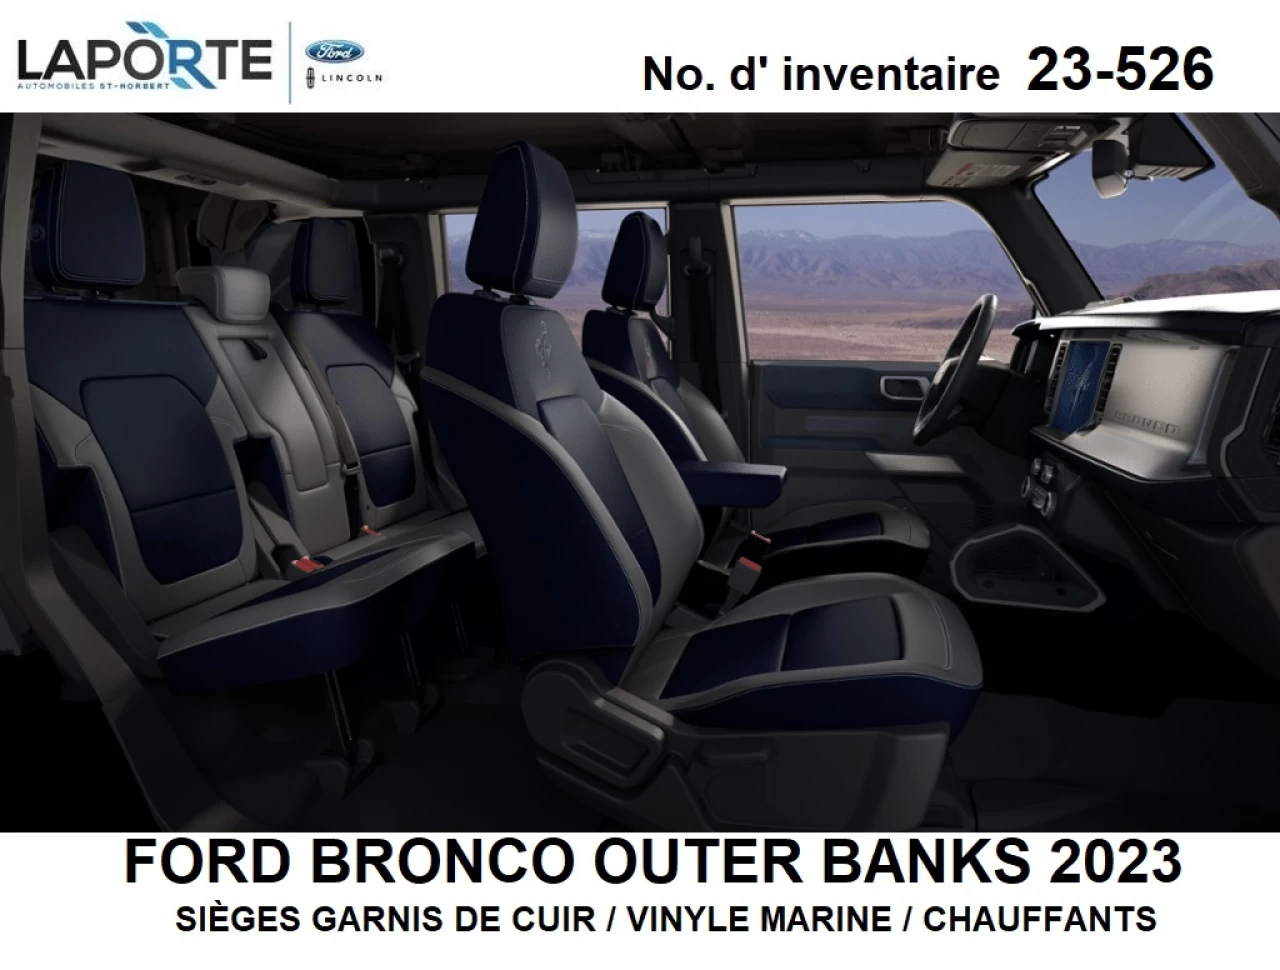 2023 Ford Bronco OUTER BANKS Main Image